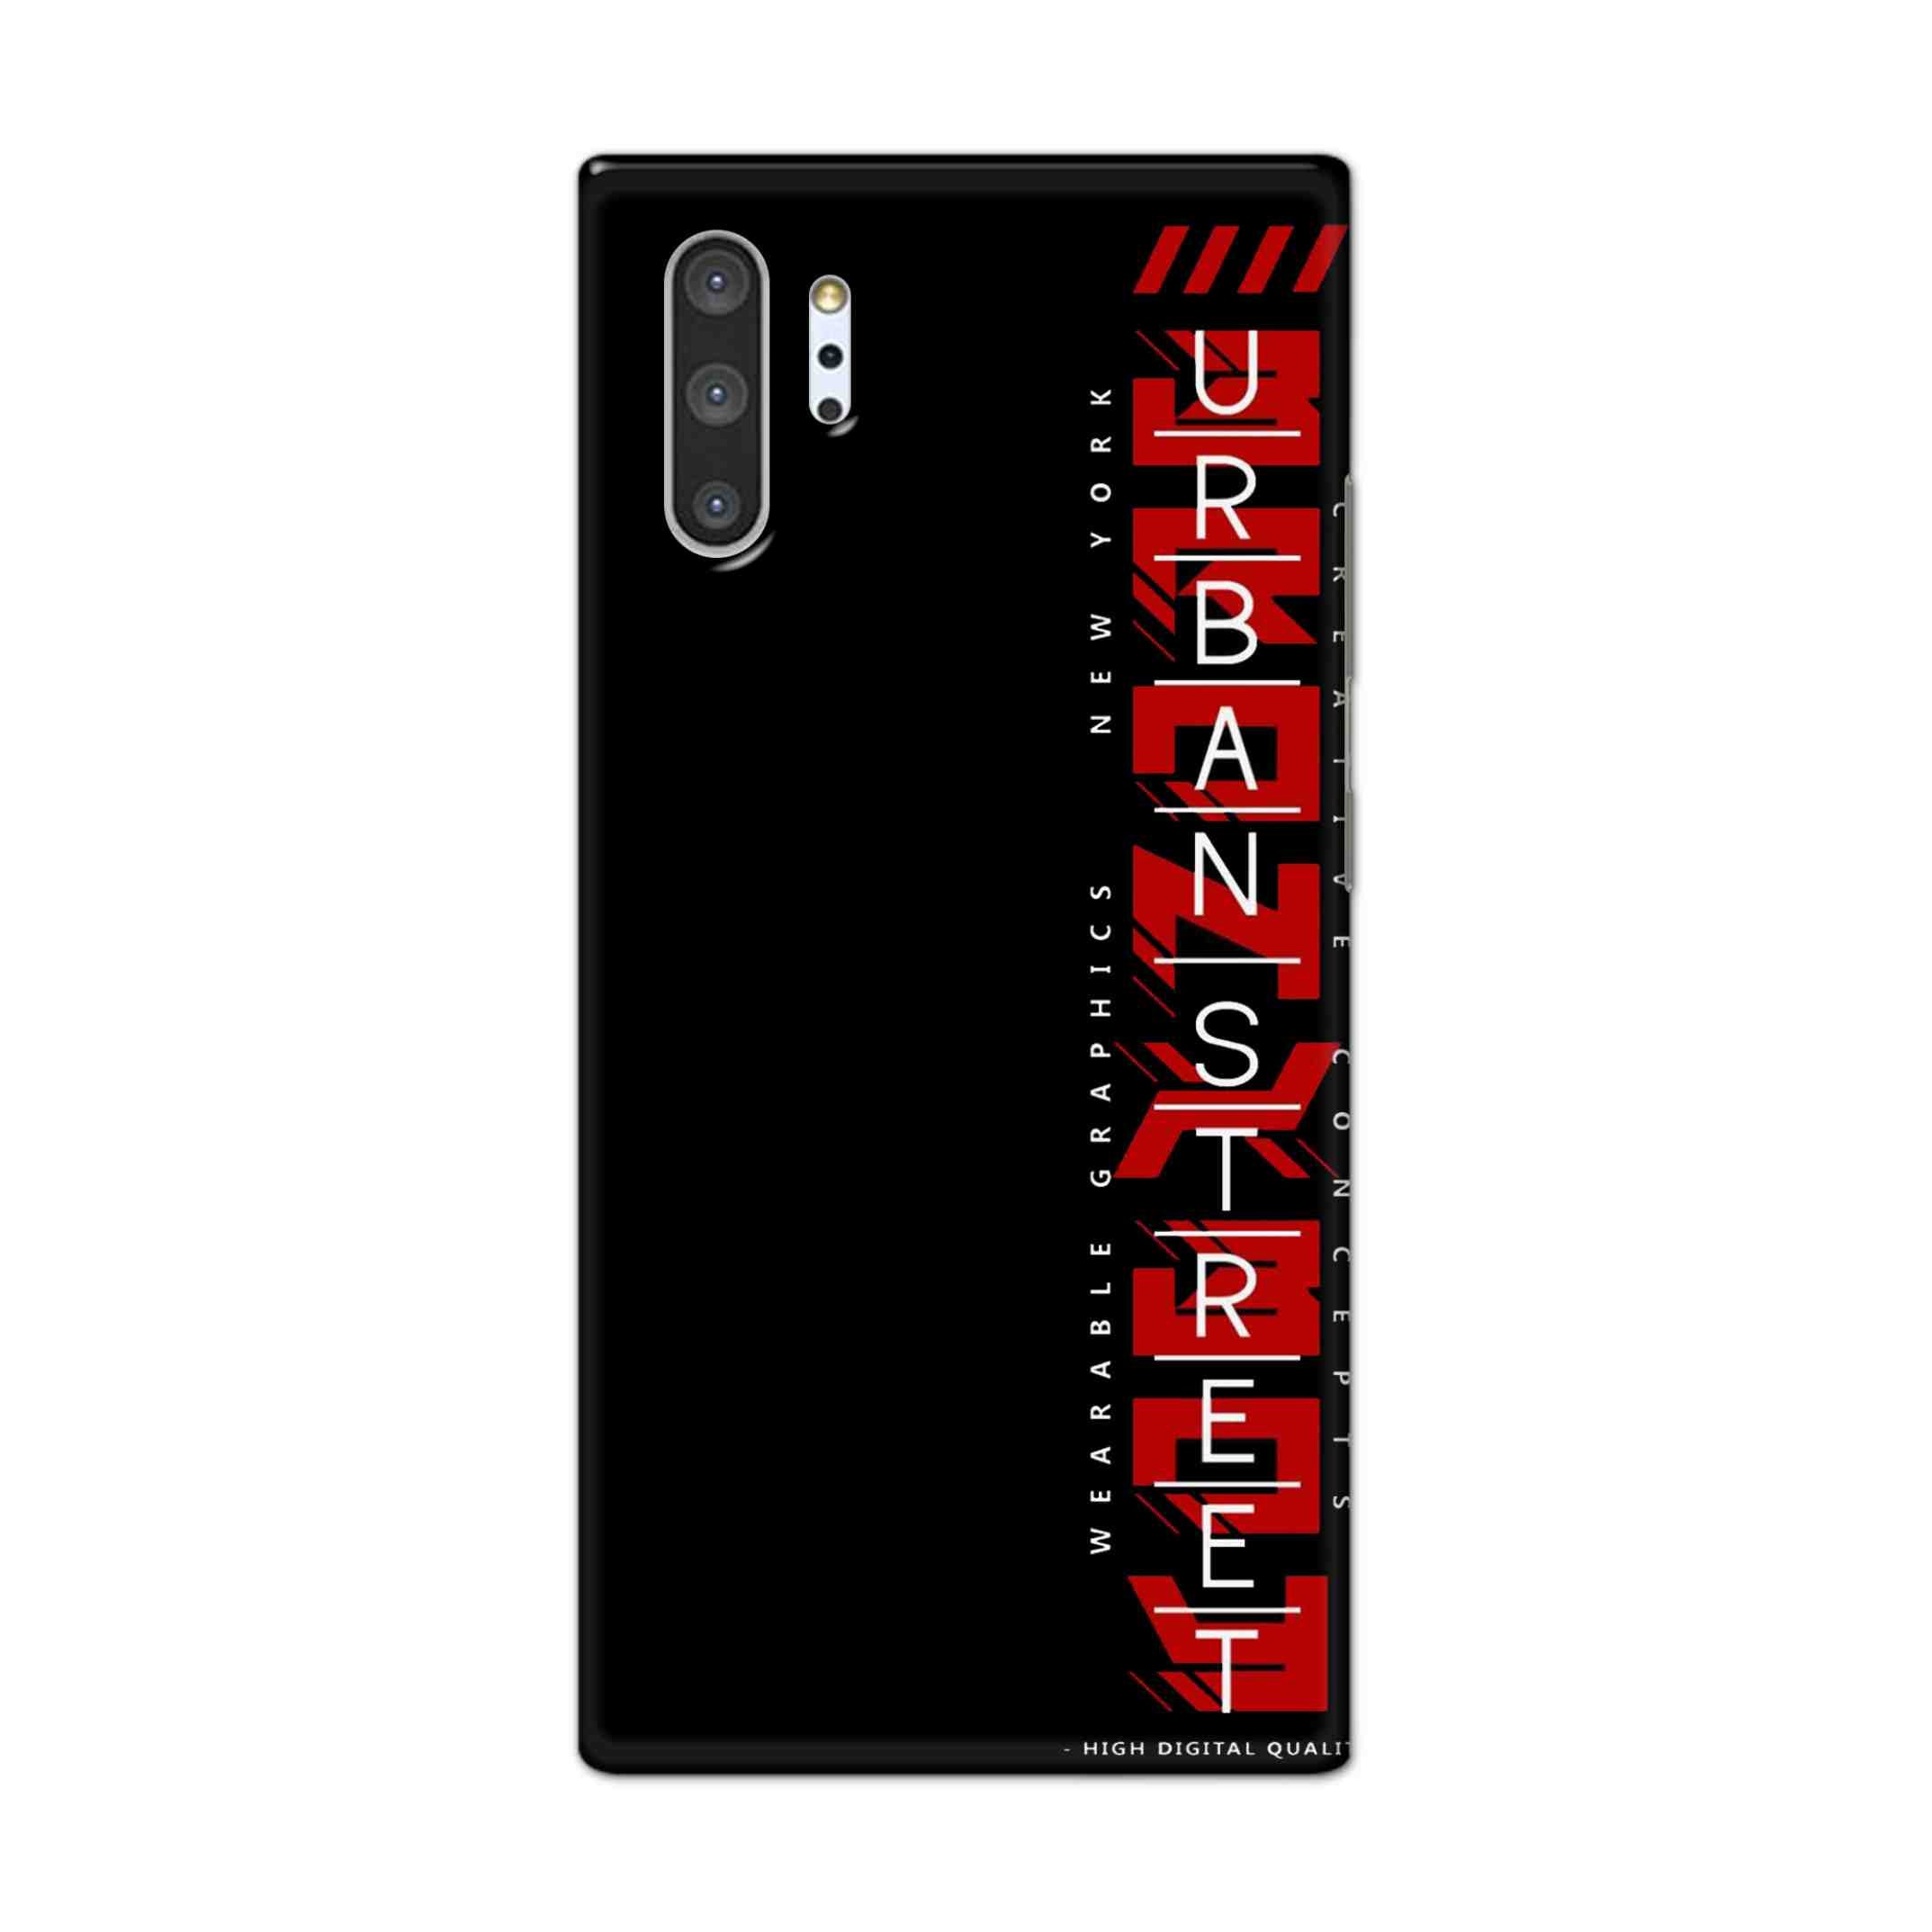 Buy Urban Street Hard Back Mobile Phone Case Cover For Samsung Galaxy Note 10 Pro Online